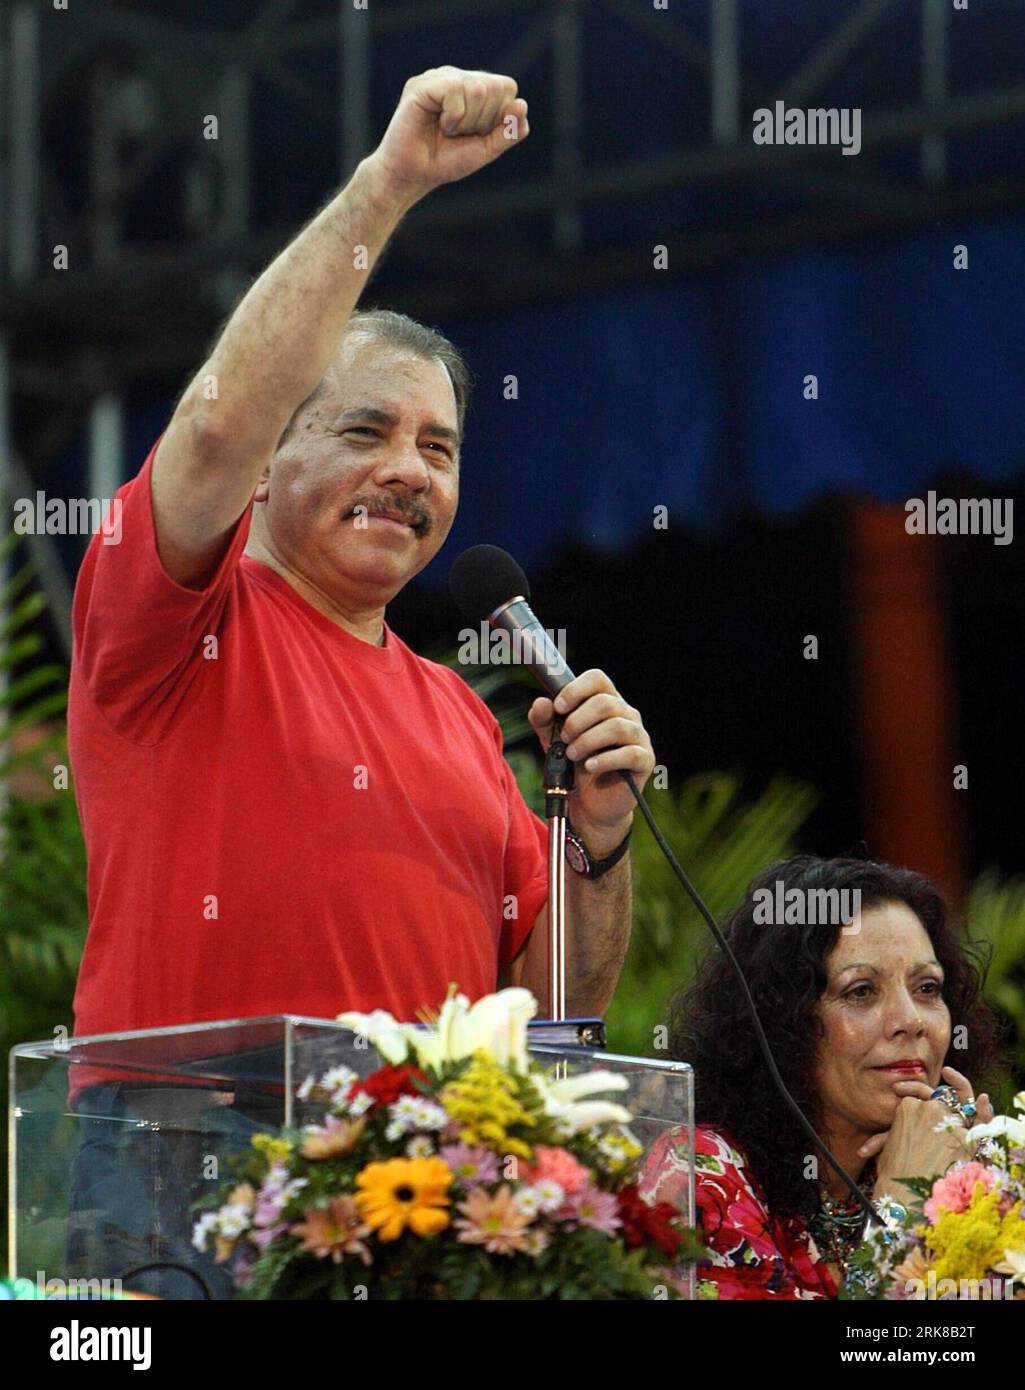 100501 -- MANAGUA, May 1, 2010 Xinhua -- Nigaragua s President Daniel Ortega speaks at a grand rally marking the May Day in Managua, capital of Nigaragua, on Friday, April 30, 2010. Xinhua/Cesar Perez dyw NIGARAGUA-MANAGUA-MAY DAY PUBLICATIONxNOTxINxCHN Stock Photo